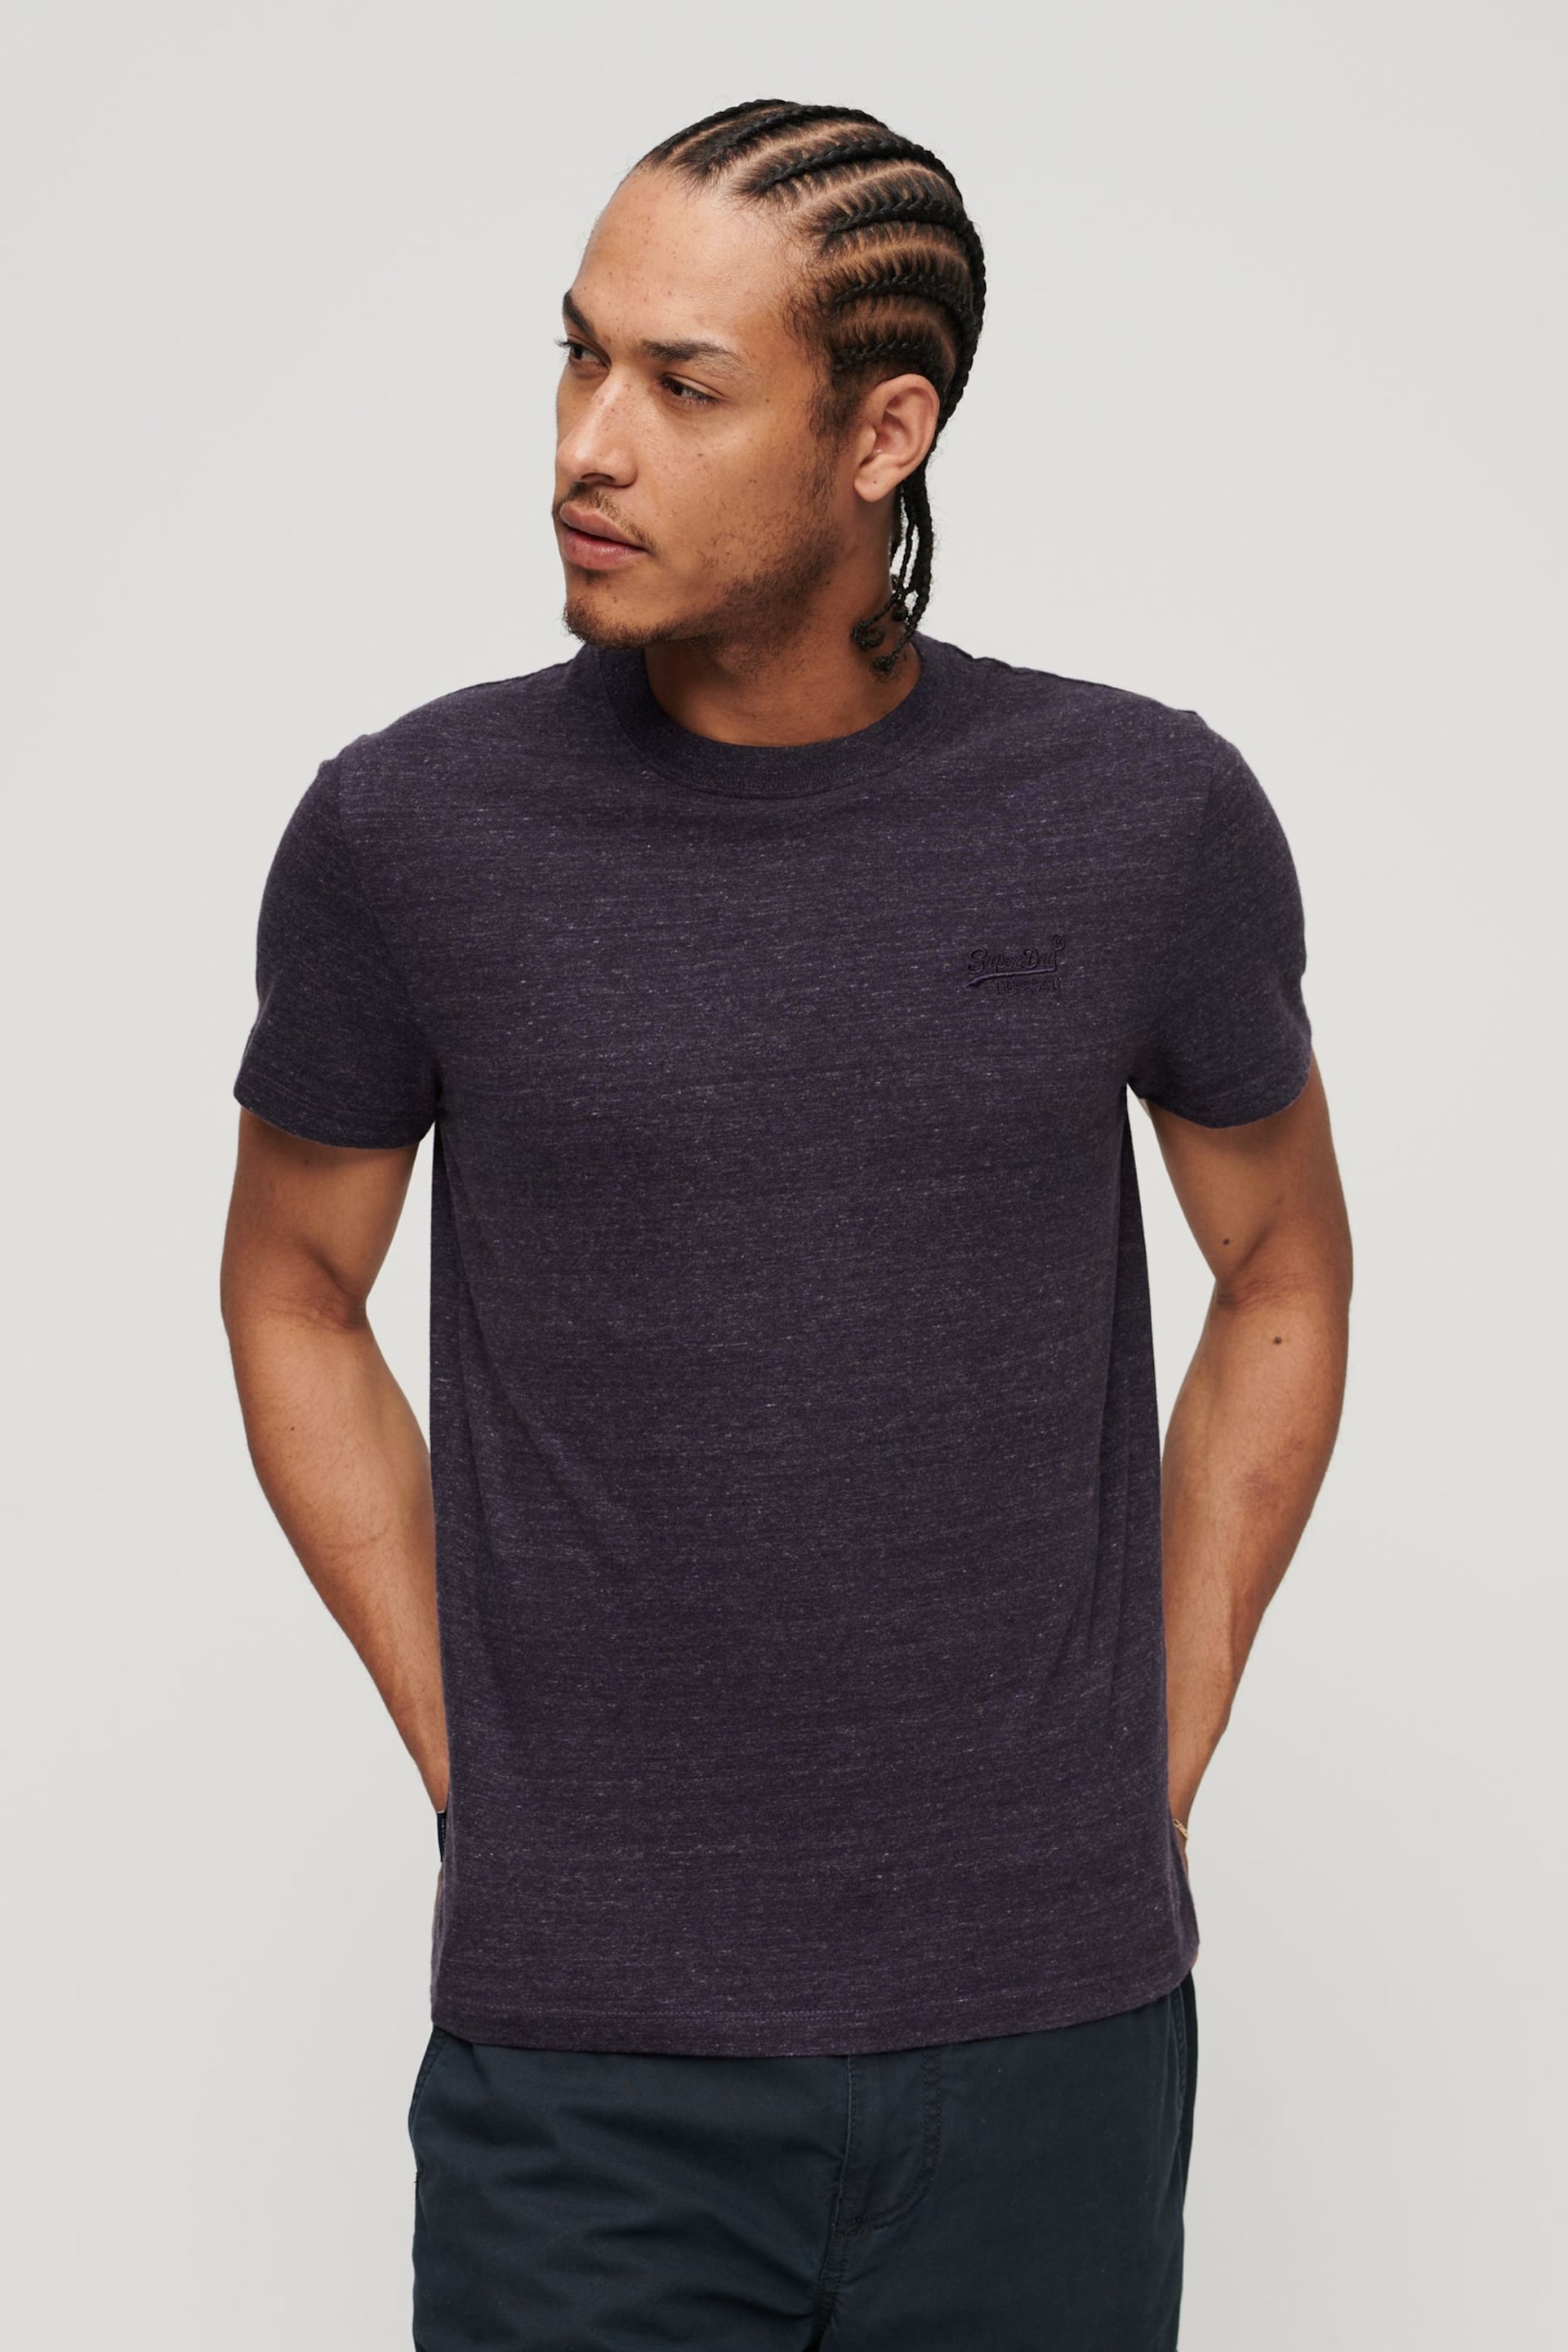 Superdry Purple Marl Vintage Logo Embroided T-Shirt - Image 1 of 6